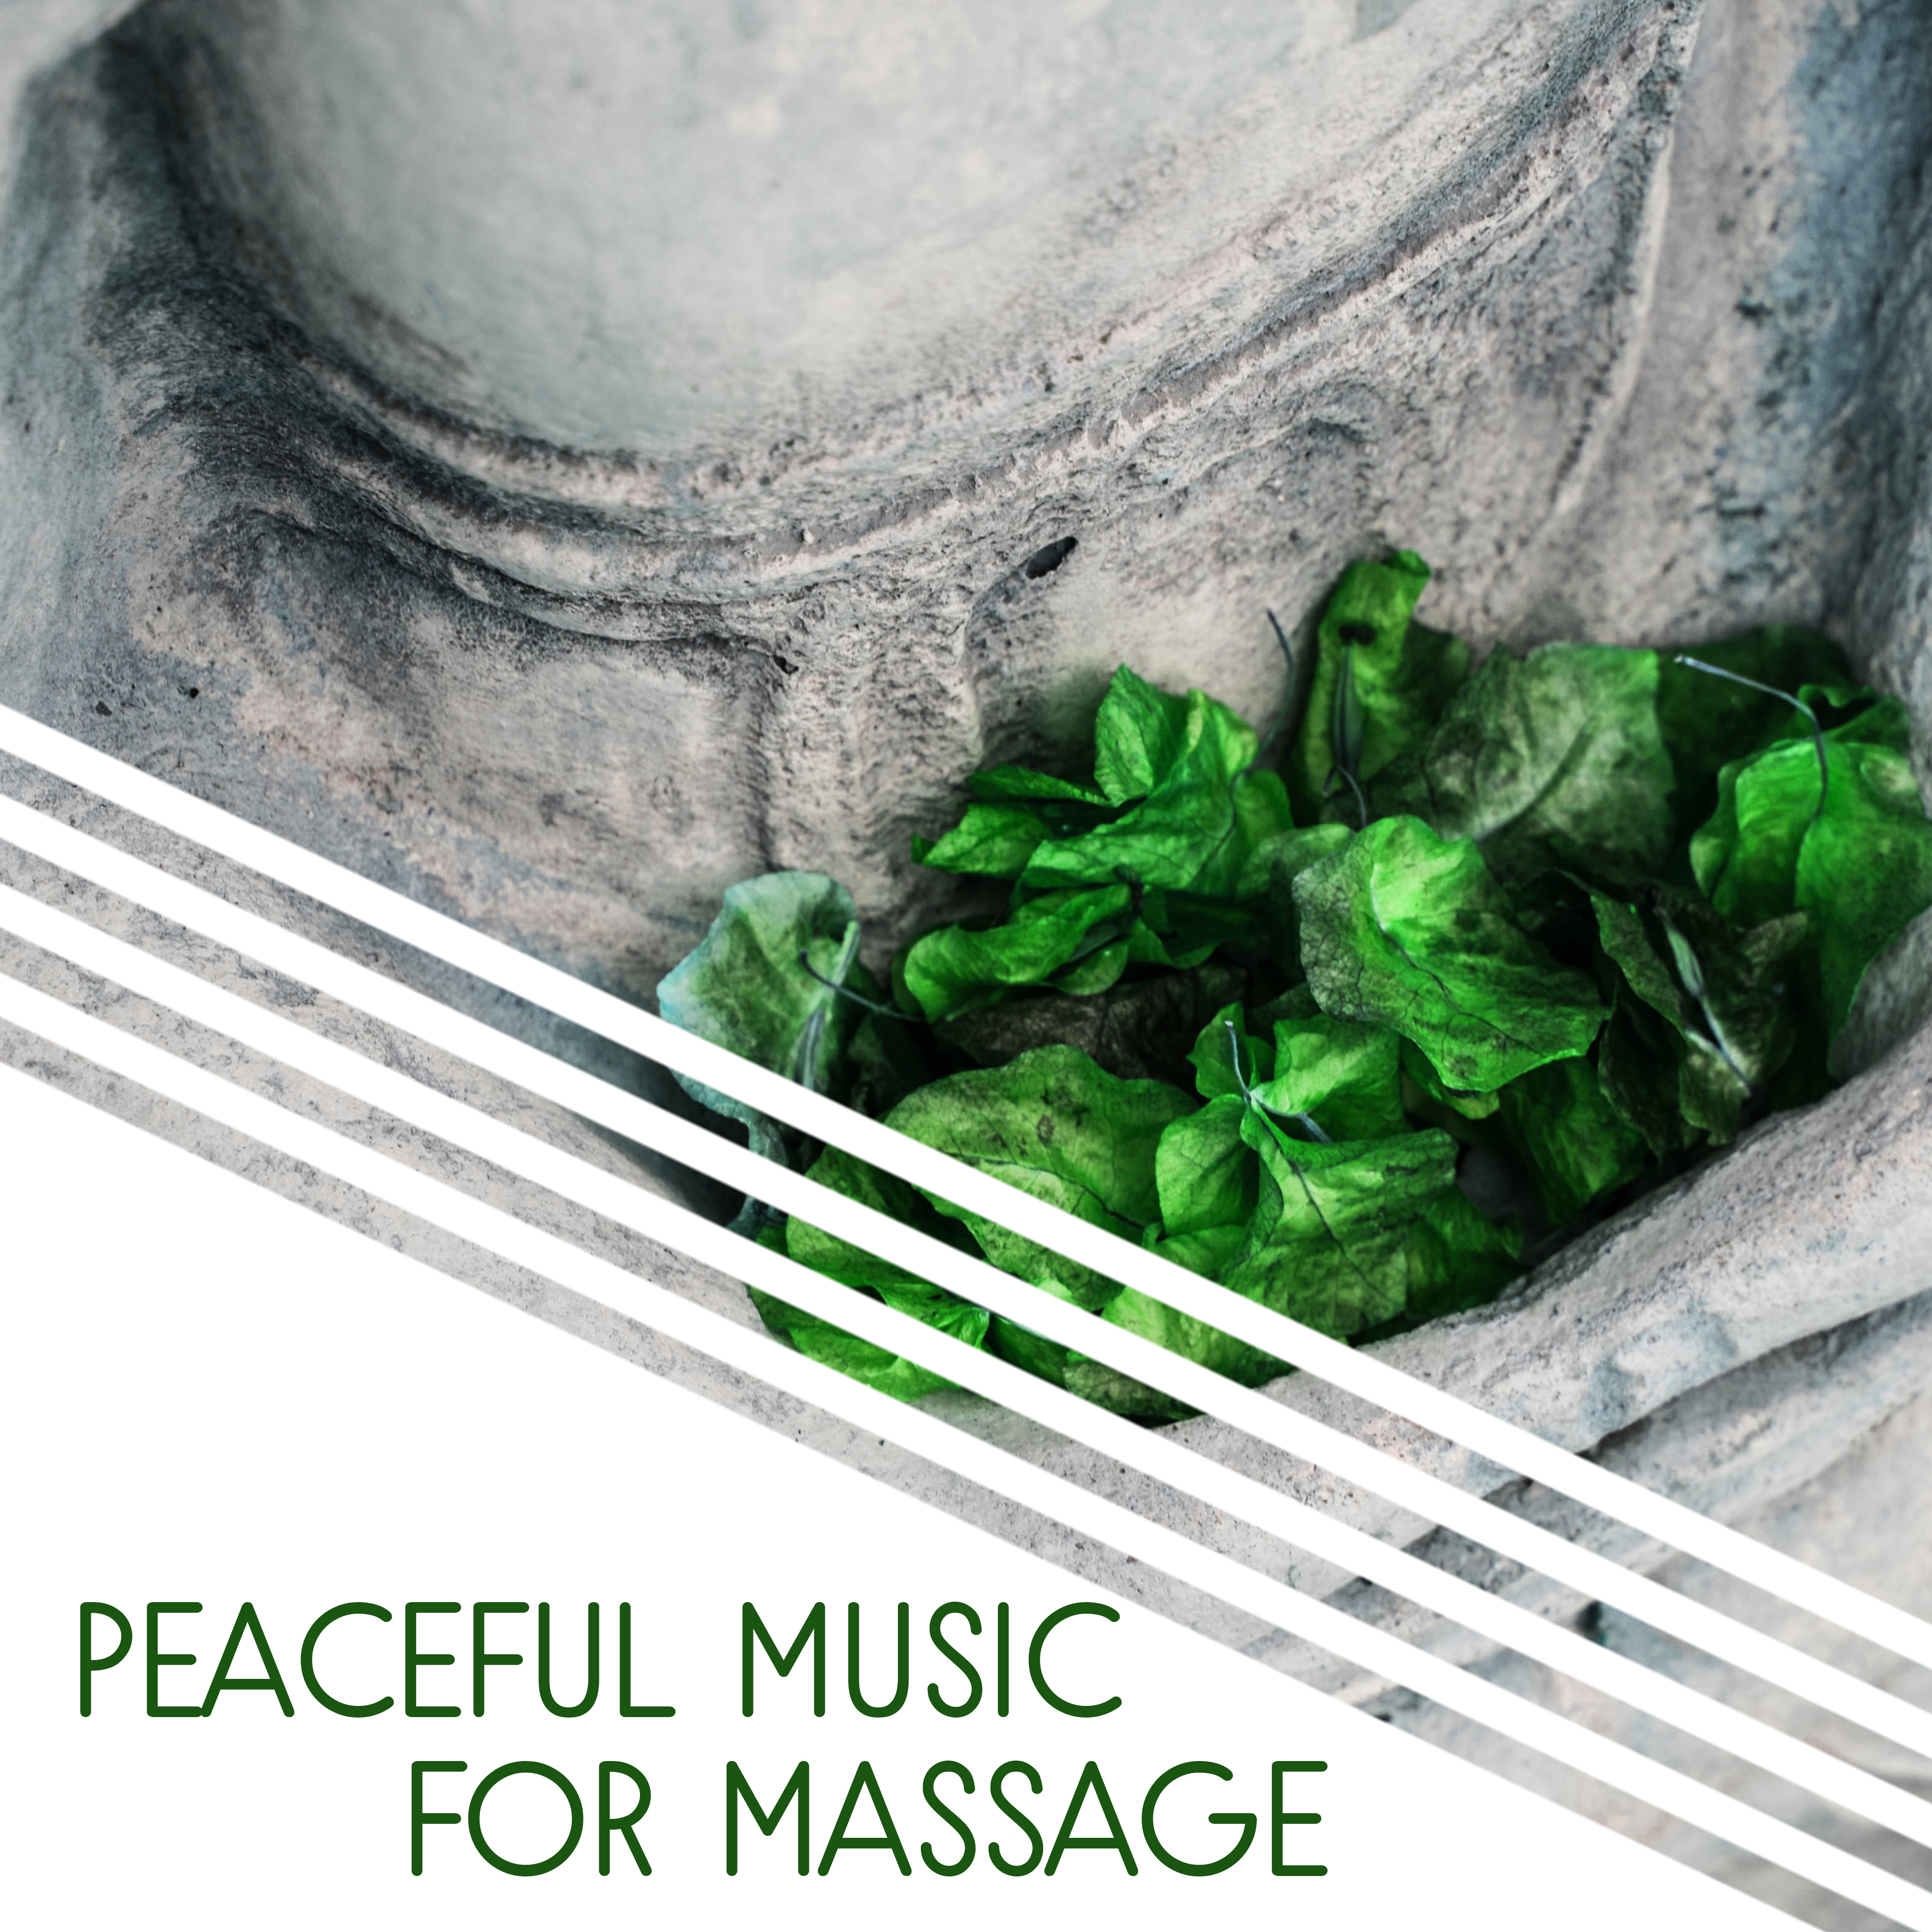 Peaceful Music for Massage – Calming Sounds to Massage, Easy Listening, Peaceful Waves